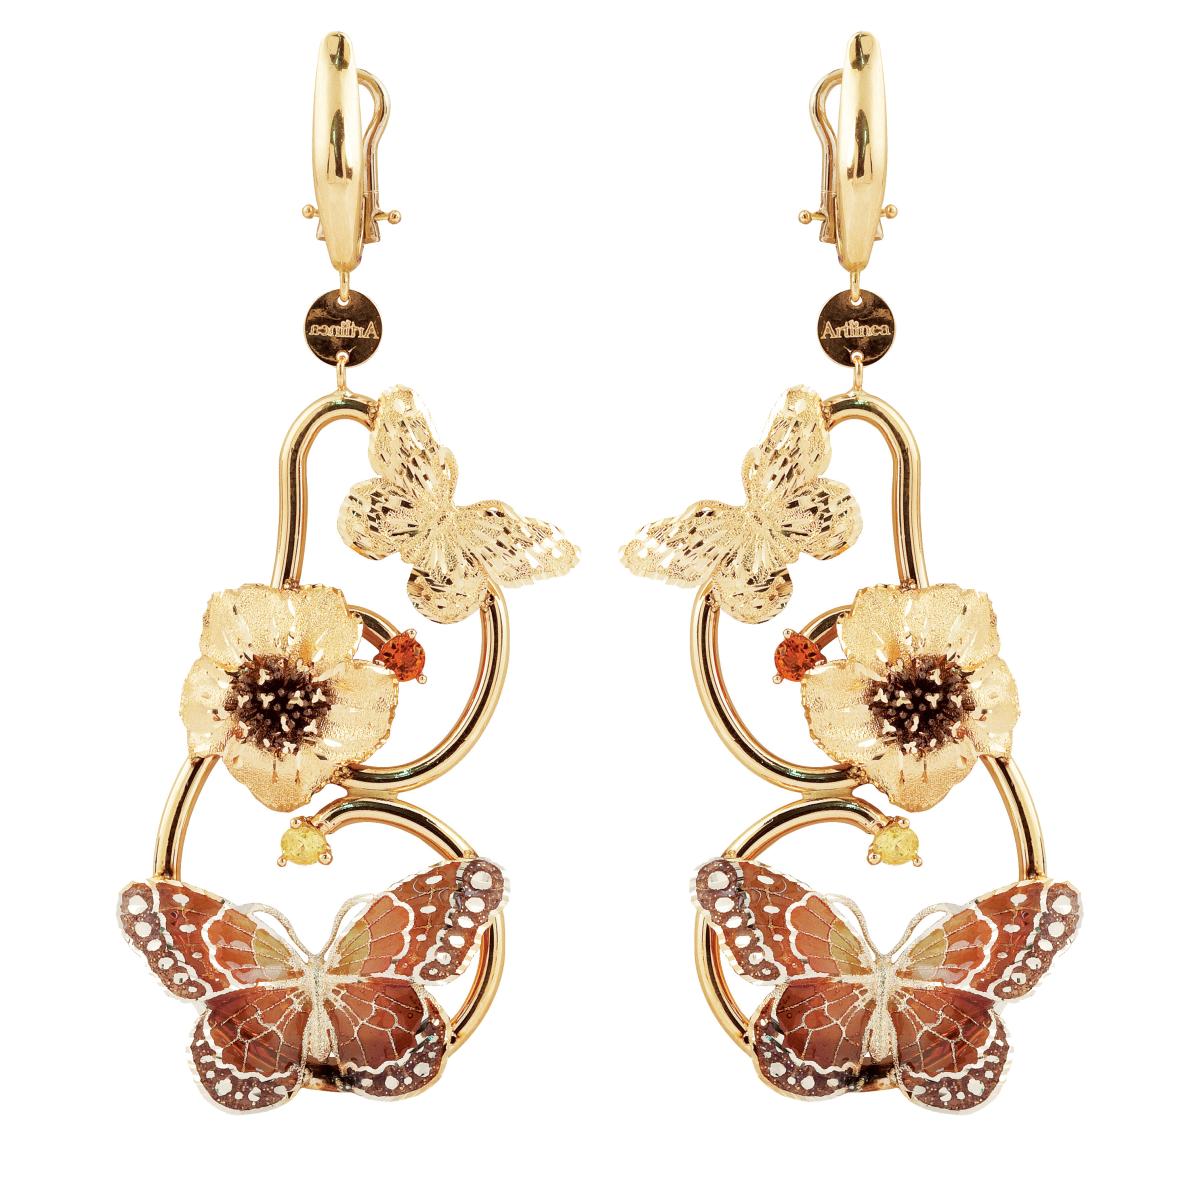 2 Butterflies and 1 flower earrings in 18kt two-tone gold, cathedral enamel and citrine stones - OCA298-MQ